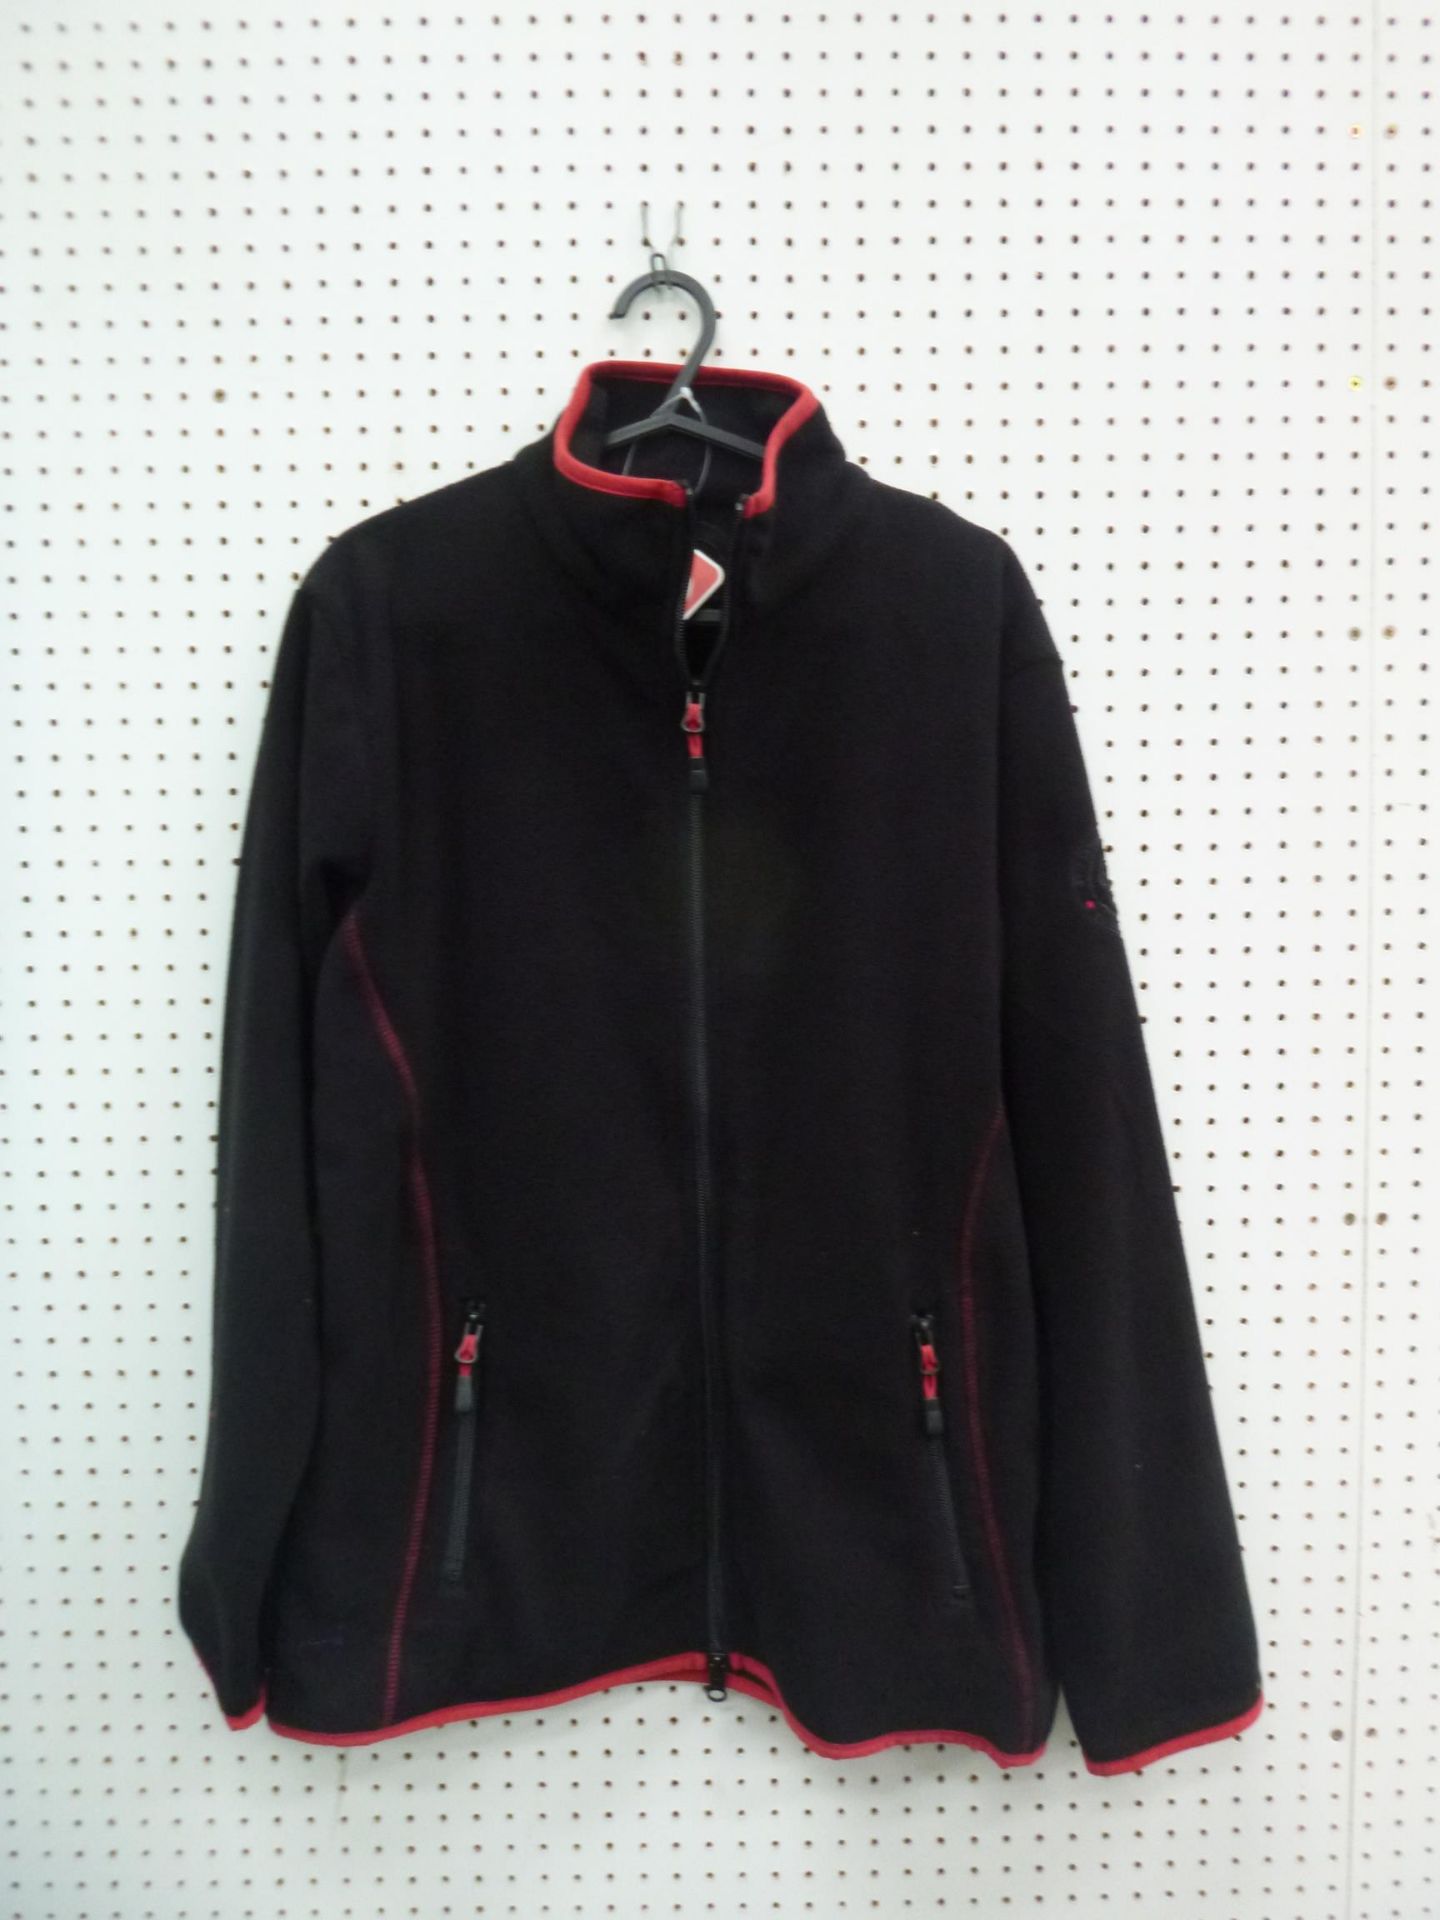 * Two New 'Bridleway' Micro Fleece Jackets, a Small in Black/Red and a Large in Red/Grey RRP £49. - Bild 3 aus 4